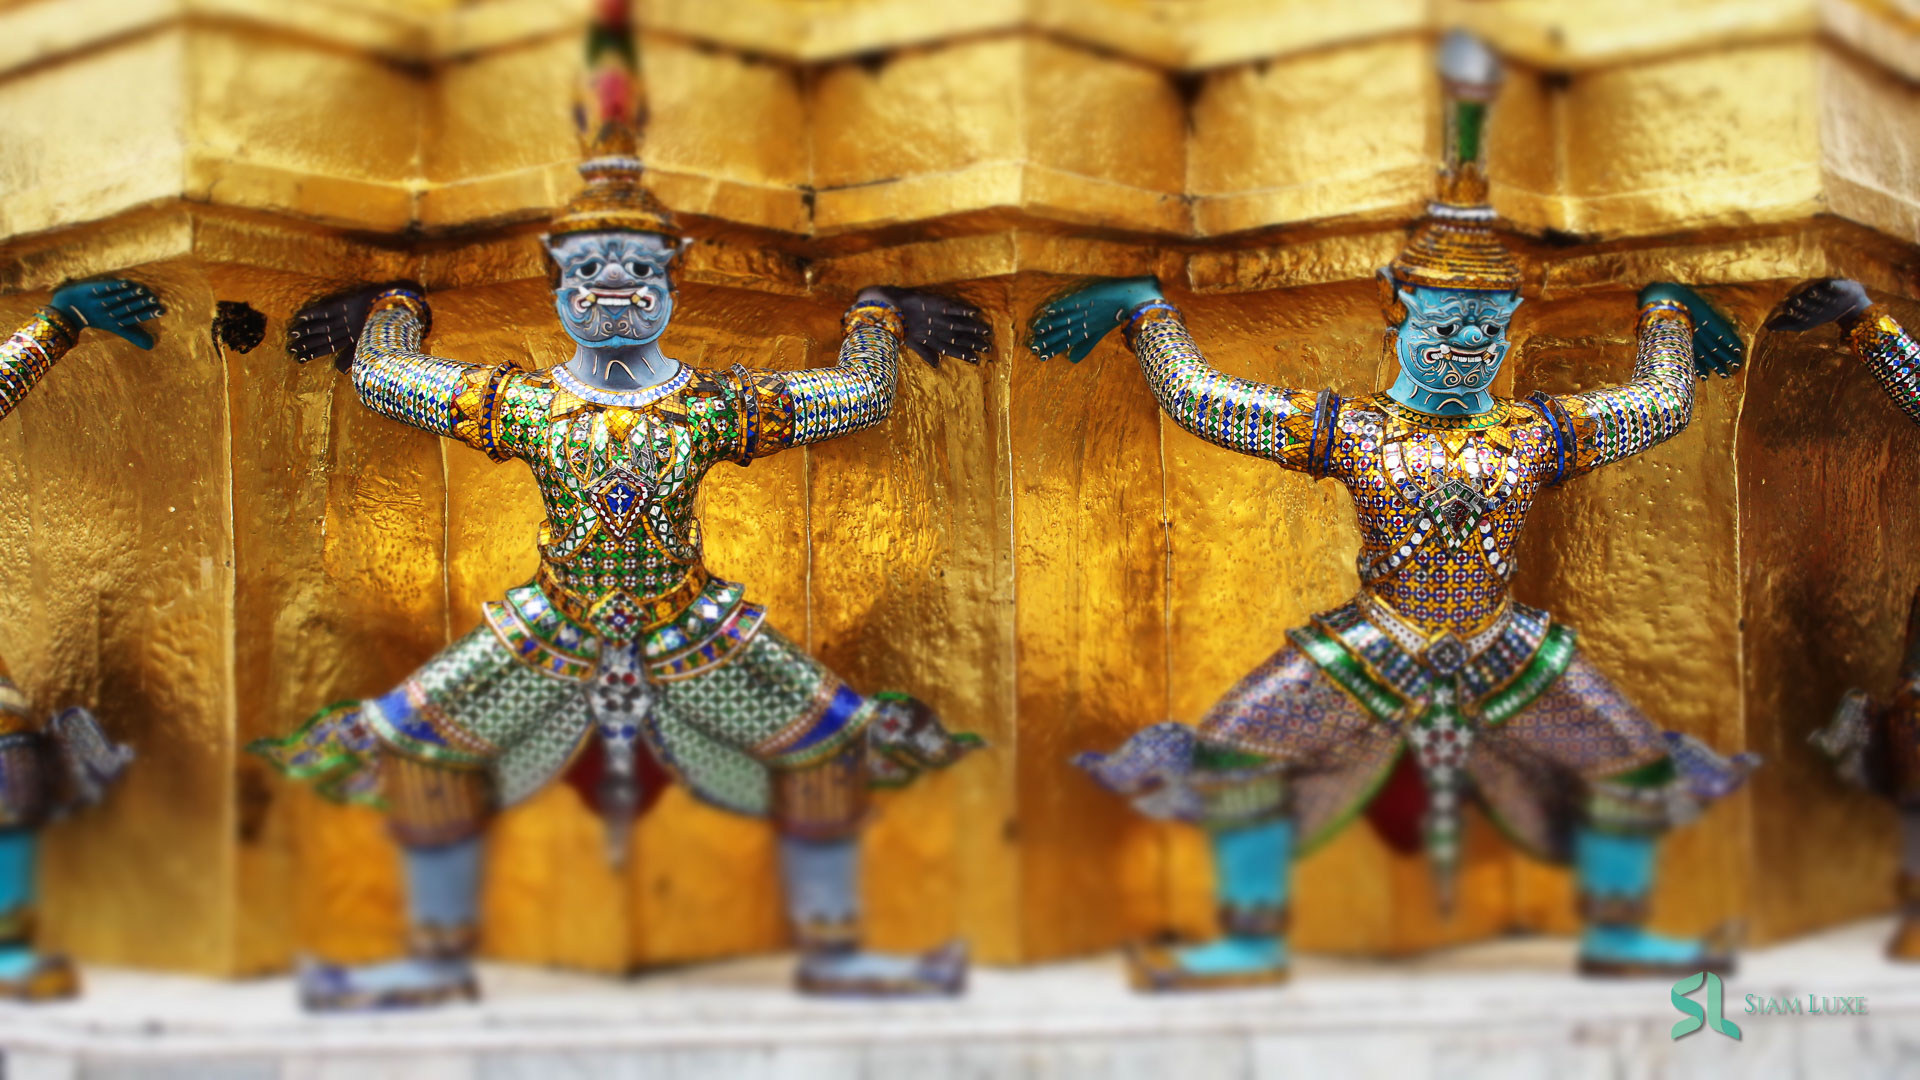 The demon guardian support the gilded stupas in Wat Phra Kaew, Bangkok, Thailand